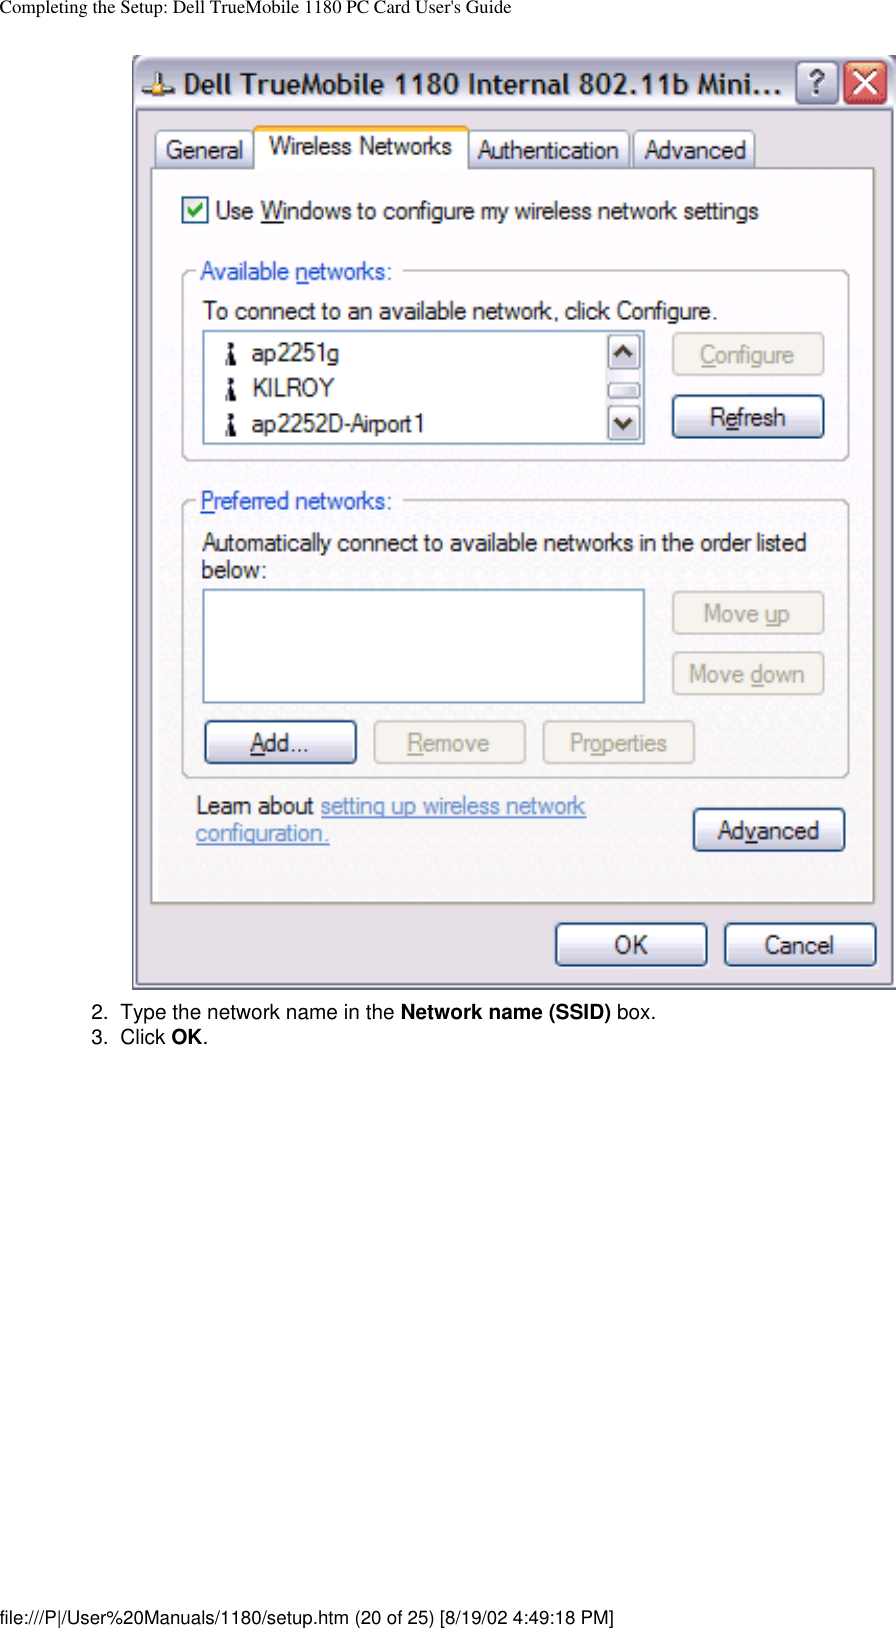 Completing the Setup: Dell TrueMobile 1180 PC Card User&apos;s Guide2.  Type the network name in the Network name (SSID) box.3.  Click OK. file:///P|/User%20Manuals/1180/setup.htm (20 of 25) [8/19/02 4:49:18 PM]